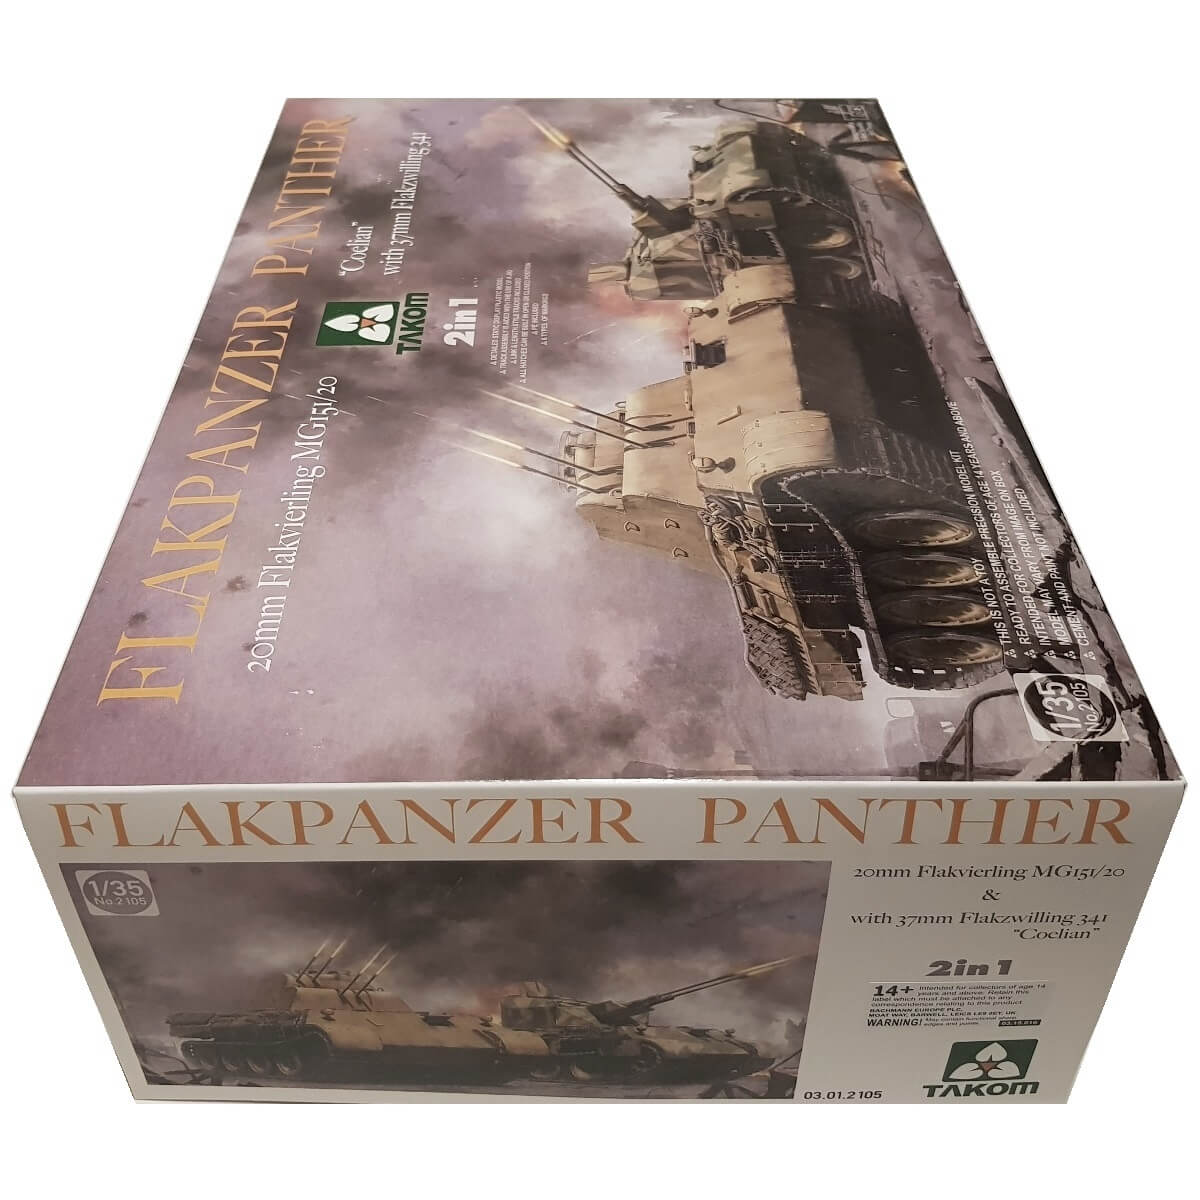 1:35 Flakpanzer Panther 20mm Flakvierling MG 151/20 - COELIAN with 37mm Flakzwilling 341 - TAKOM